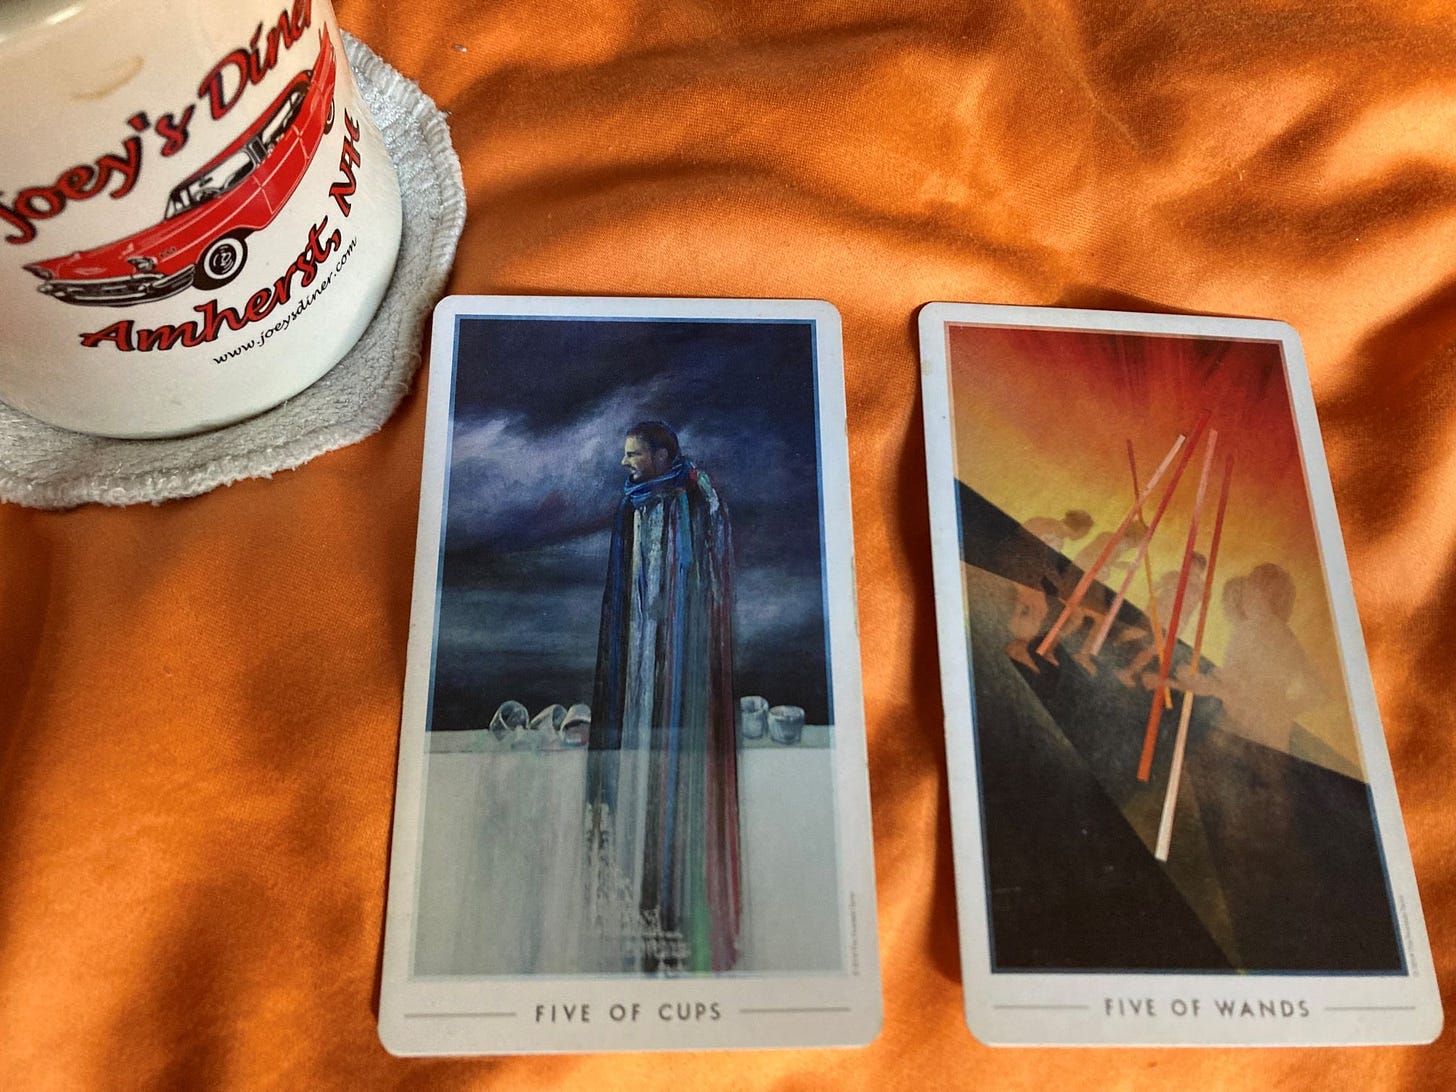 Five of Cups and Five of Wands Cards lie on an orange background with an empty coffee cup that sits on a used breast pad (which sums up my morning)